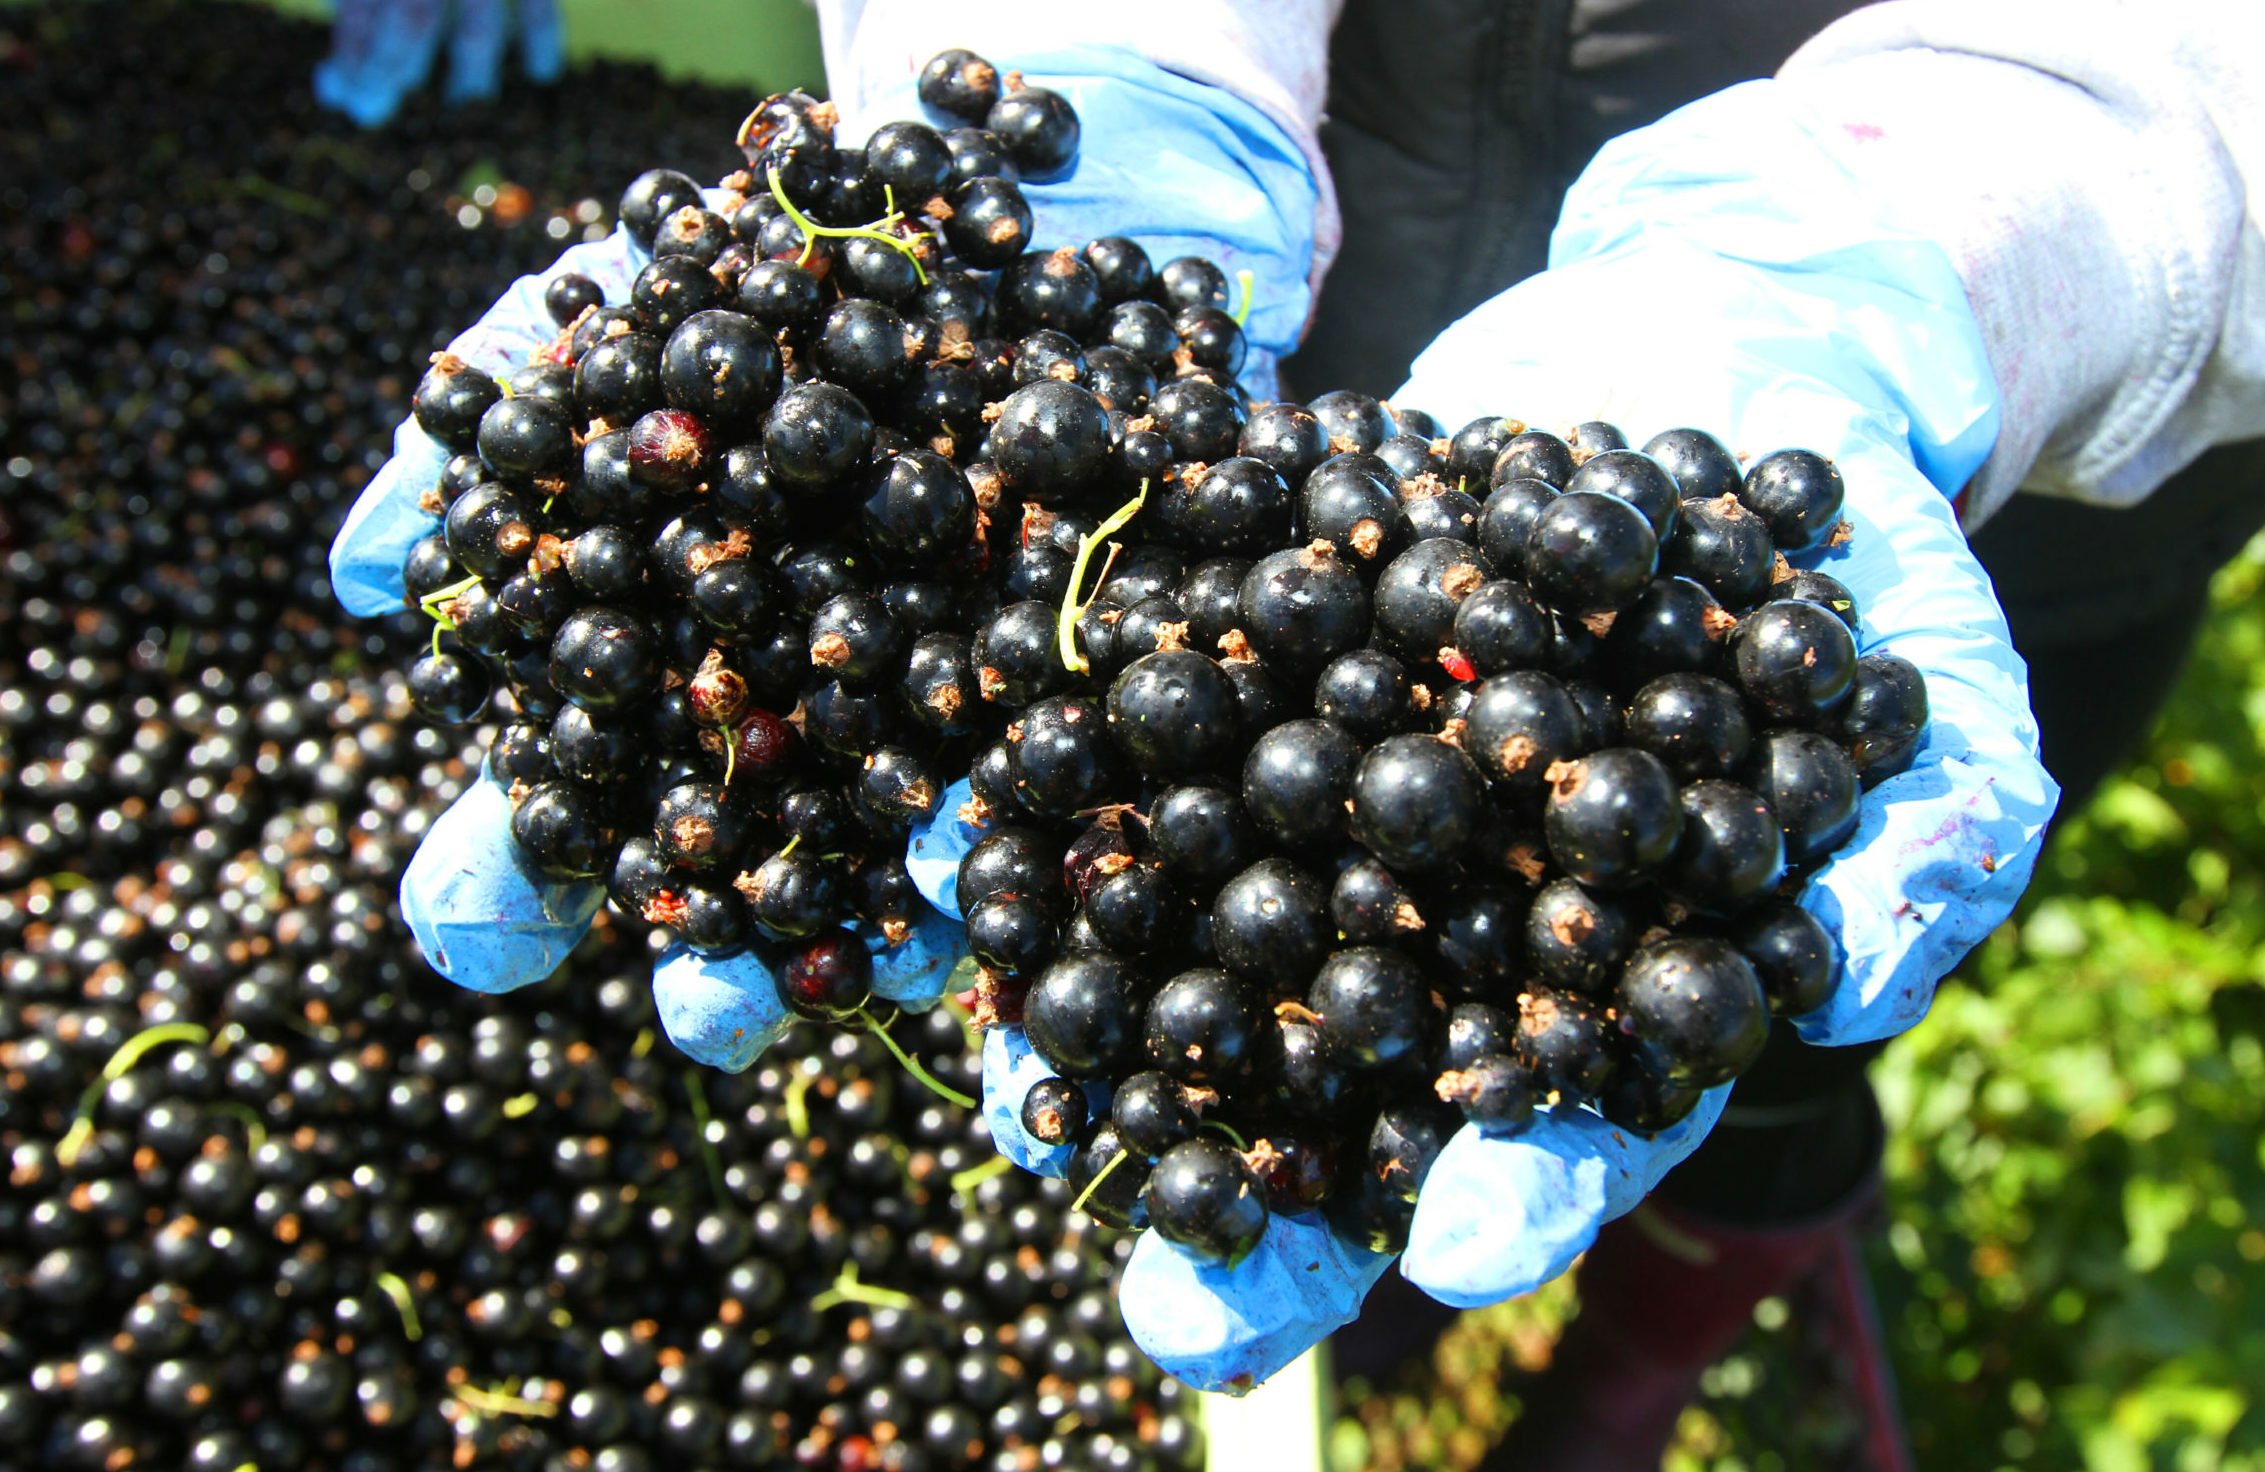 Blackcurrants need a winter chill to bear fruit come summertime.